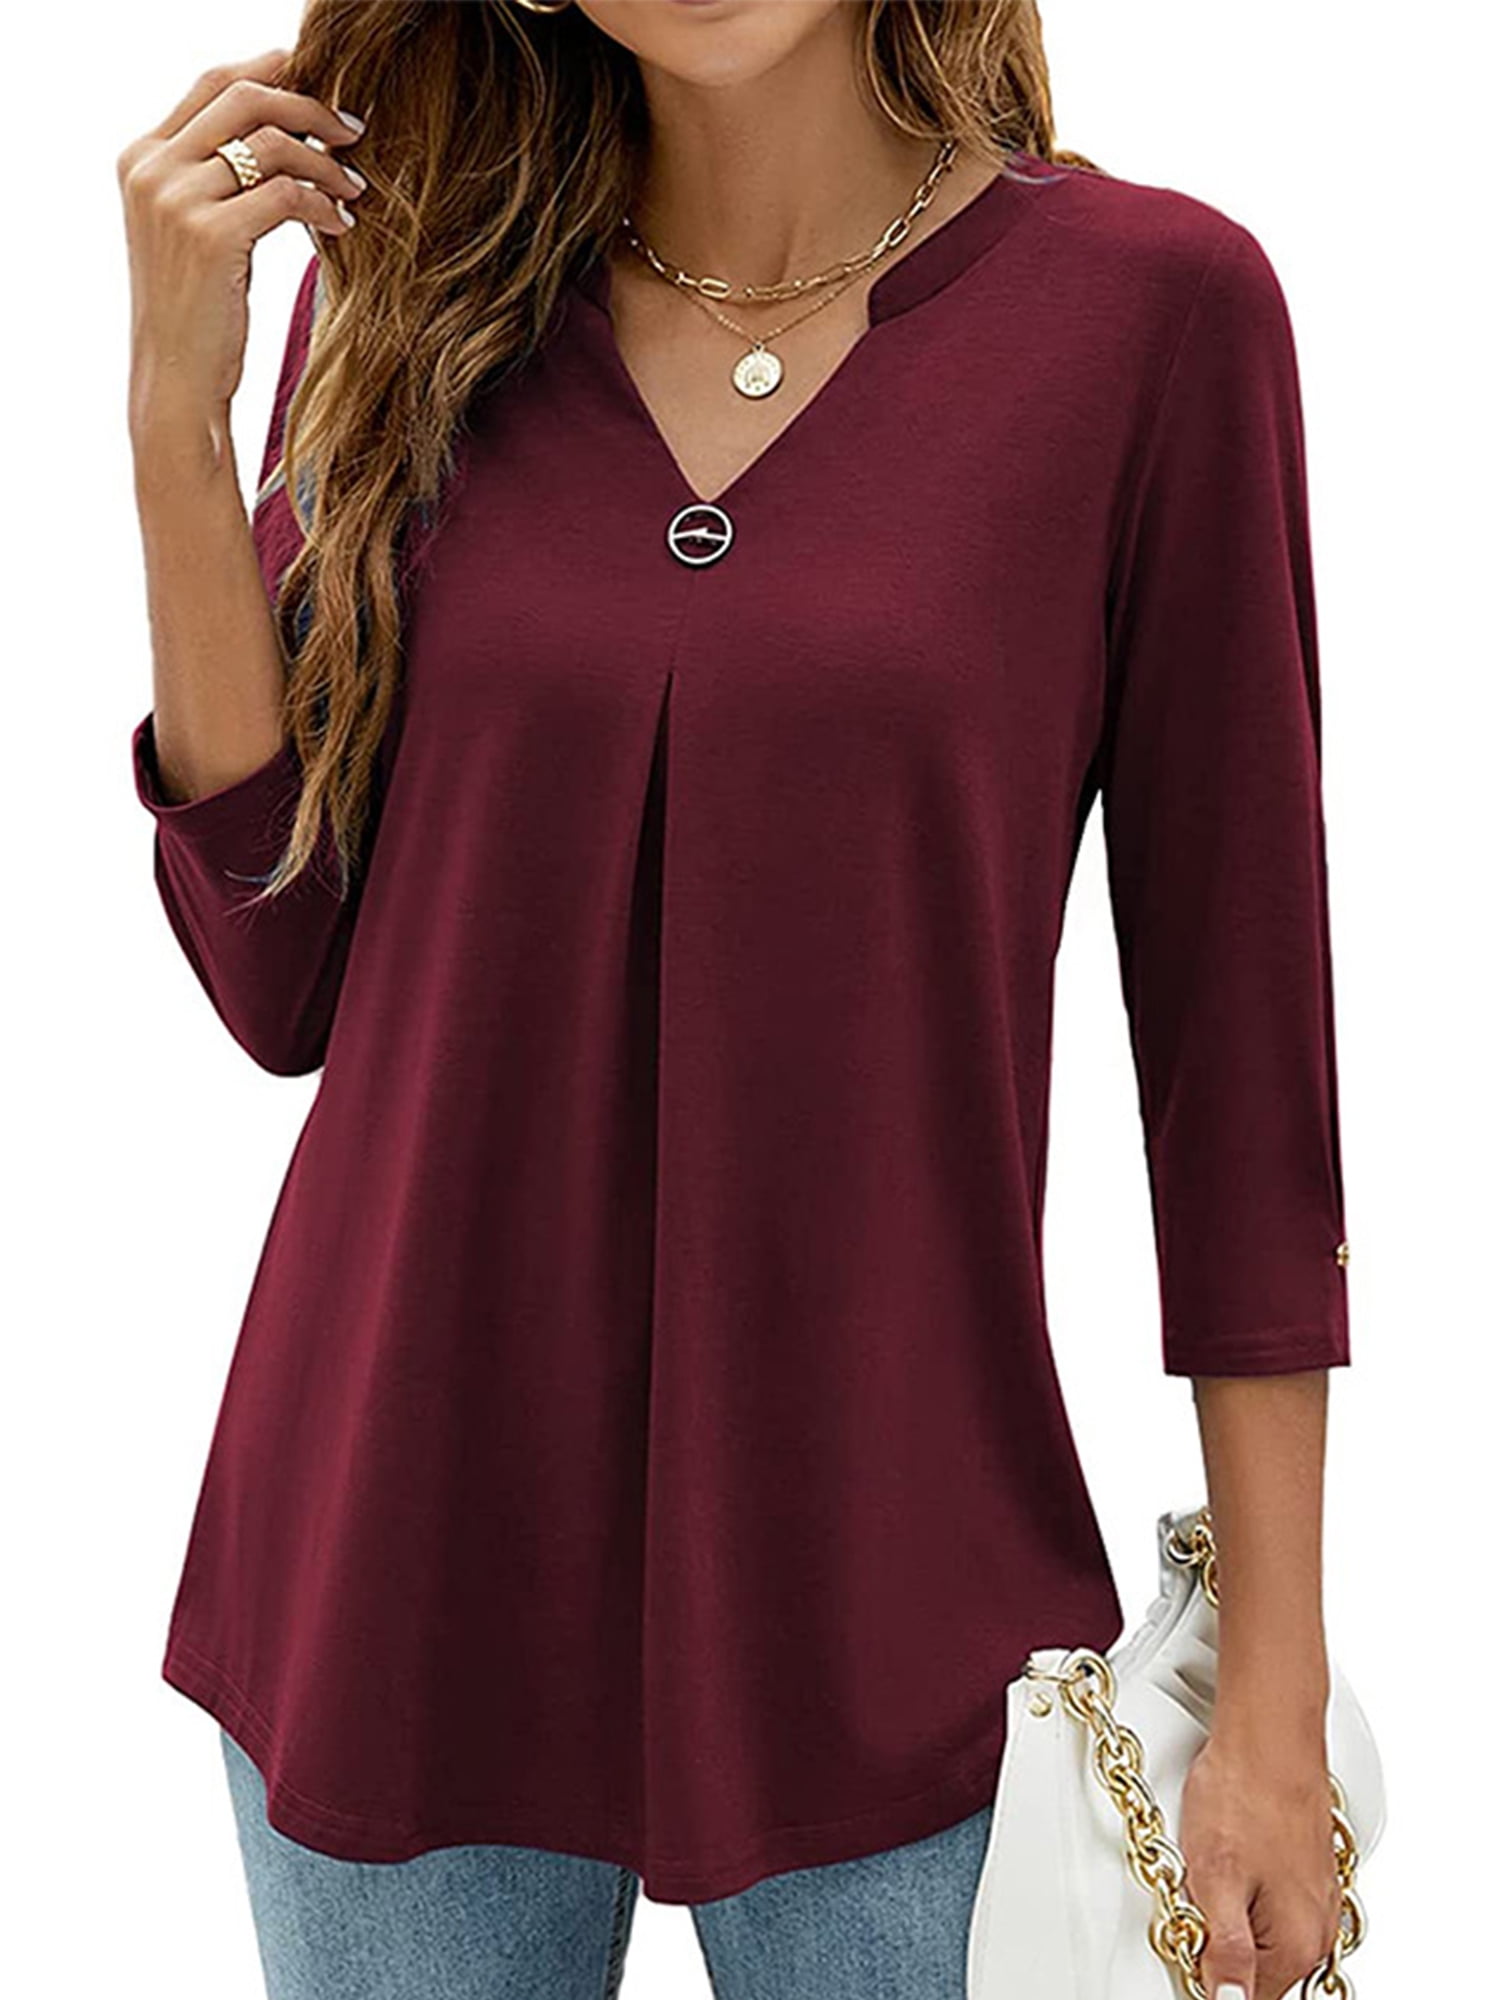  Cozirly Womens Tops Casual Dressy Slim Fit 3/4 Sleeve